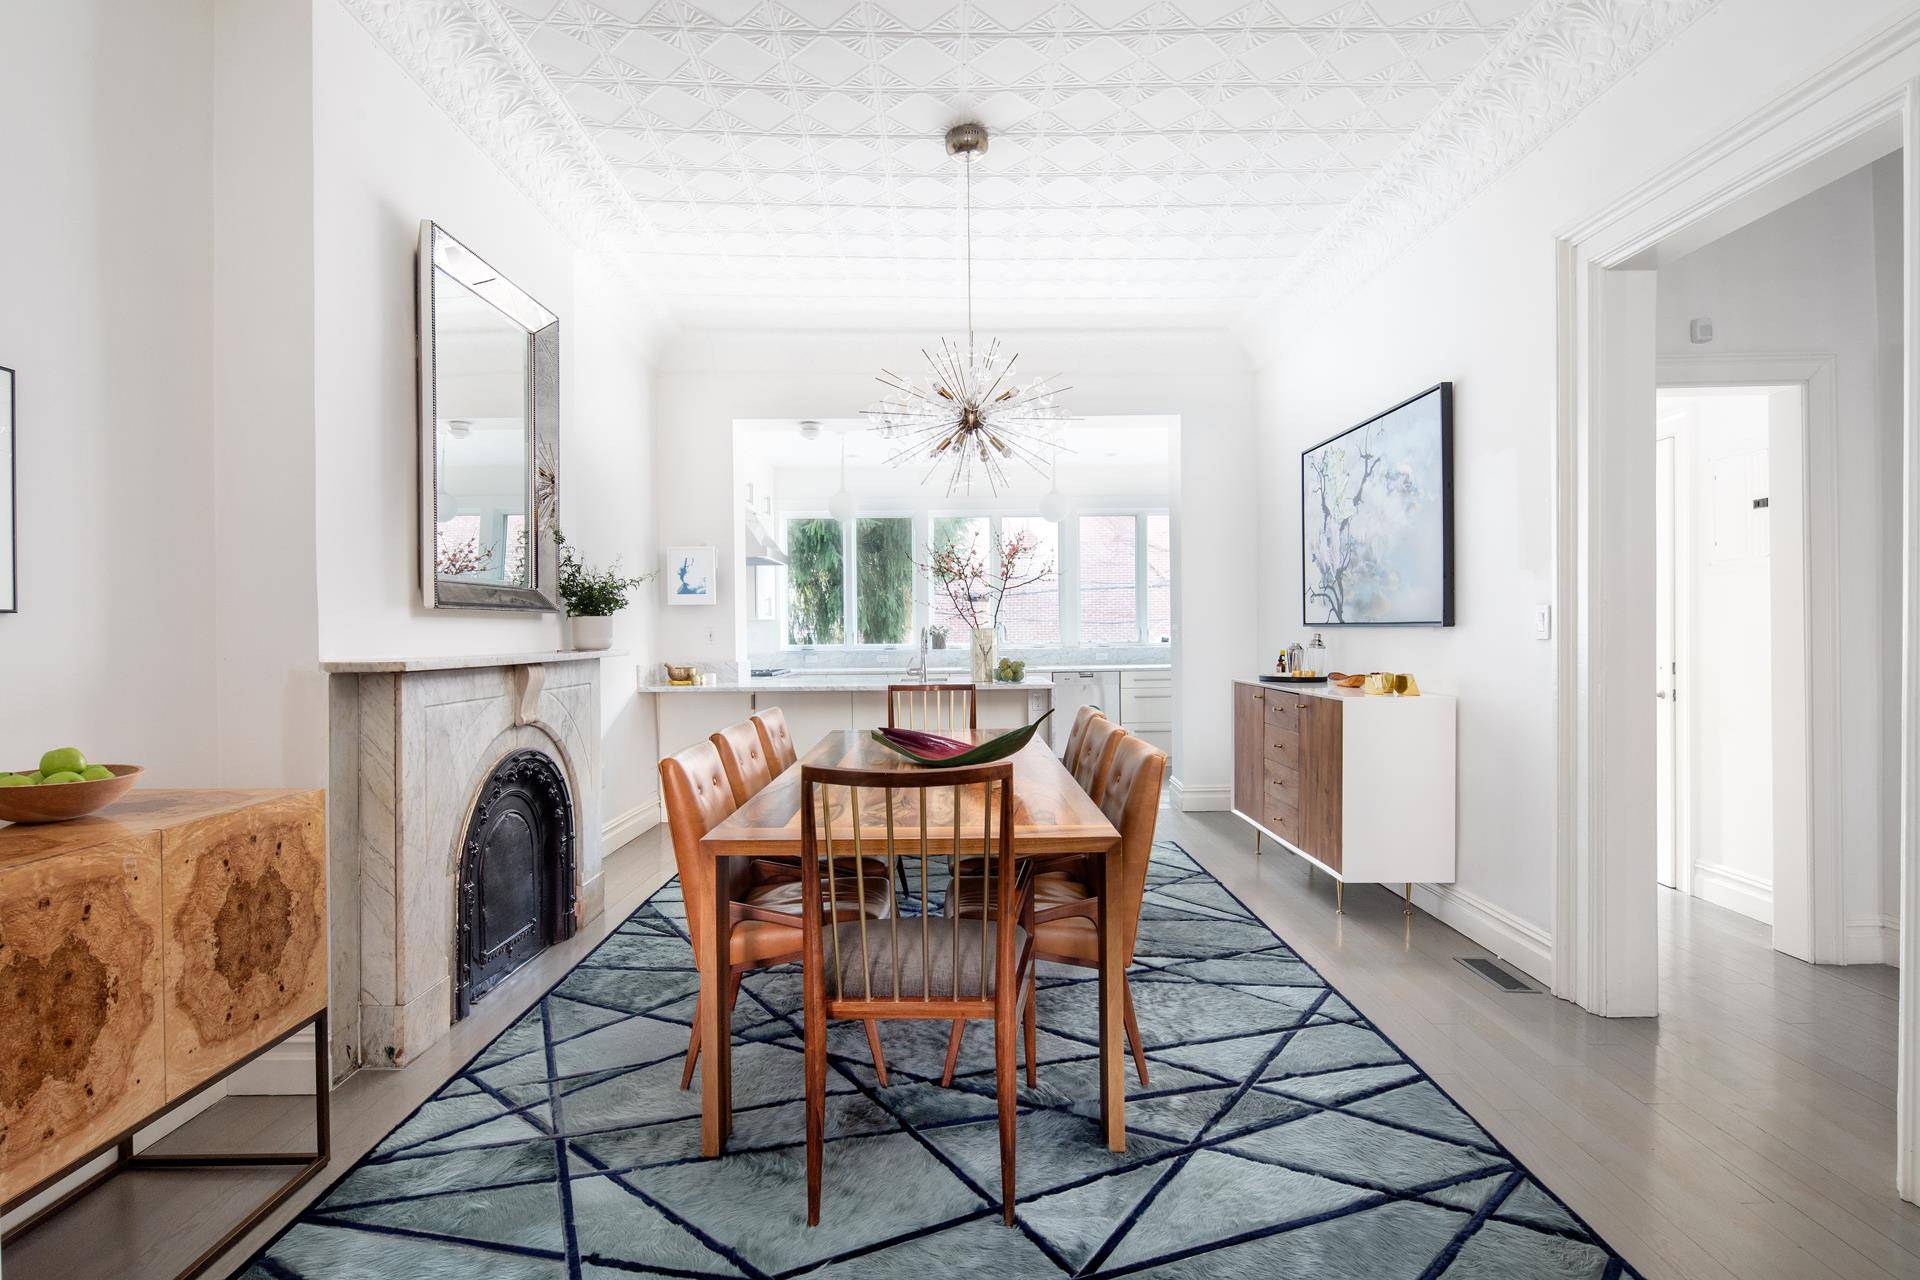 Brooklyn's past and present meet in this truly remarkable six bedroom, four and a half bathroom Carroll Gardens townhouse, flanked by Court and Smith Streets.